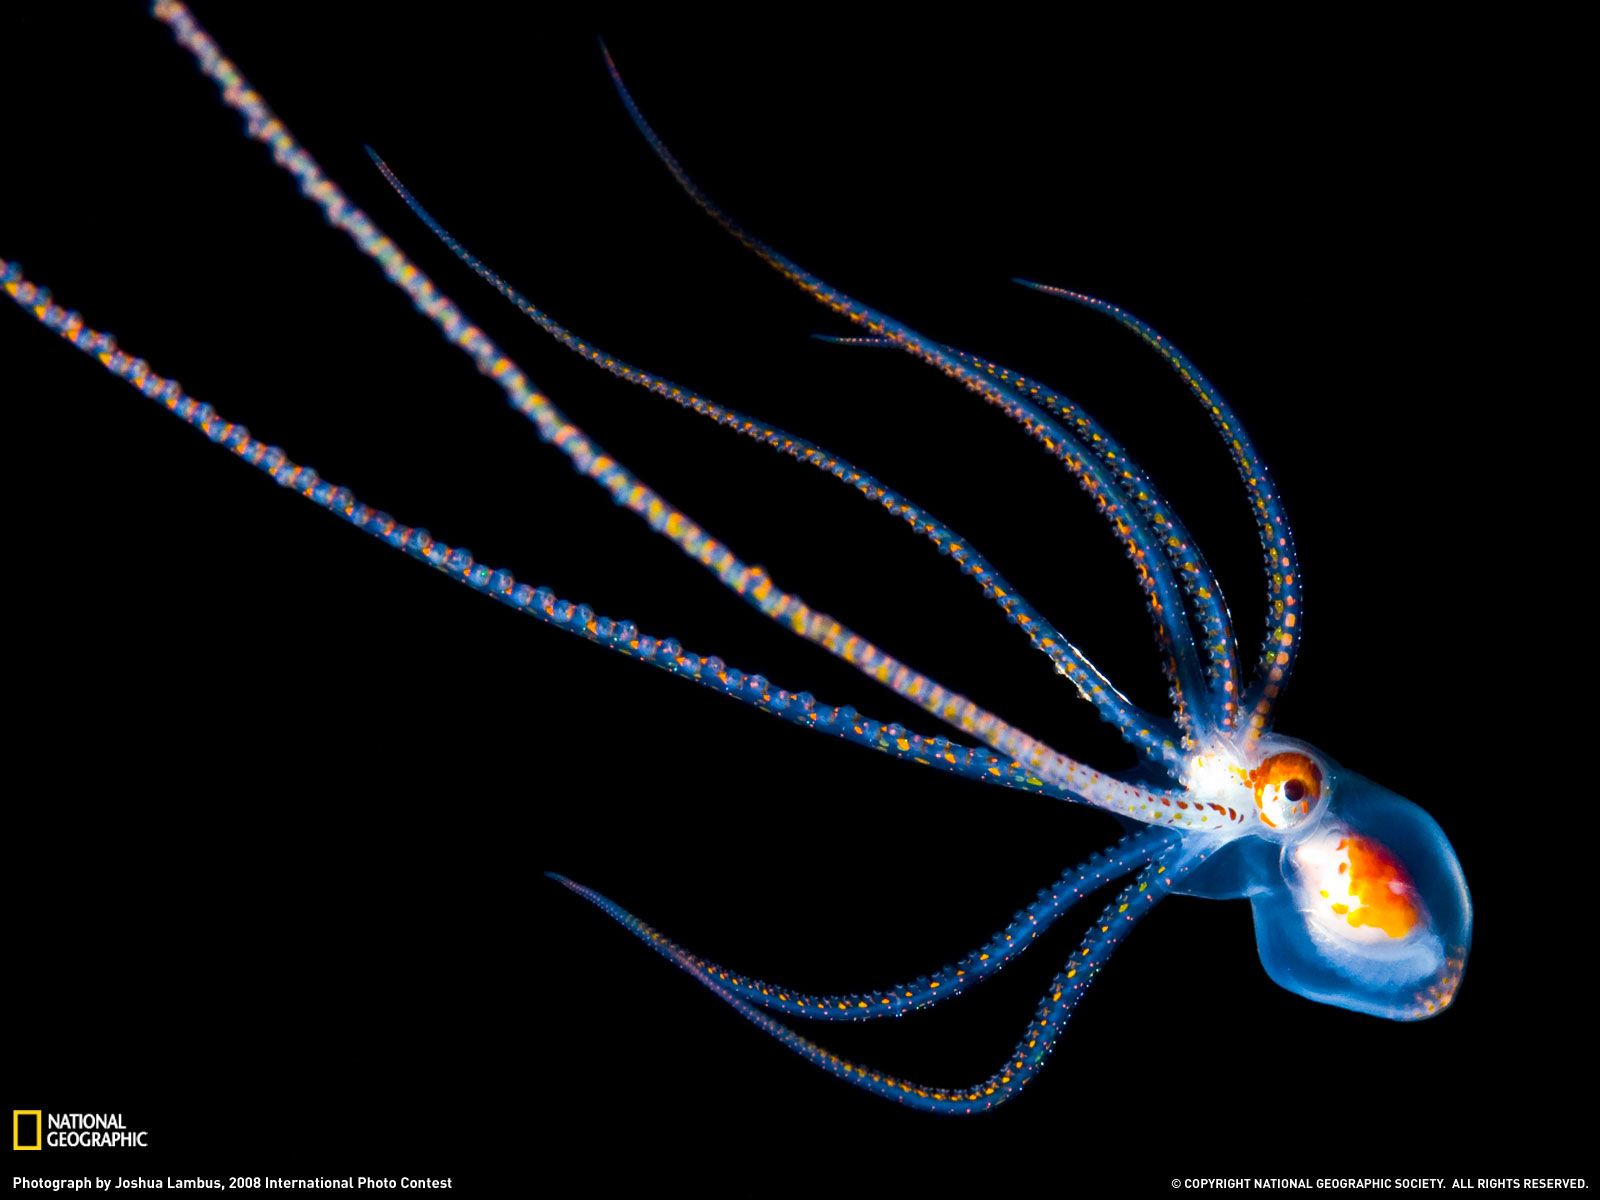 Octopus Photo, Hawaii Wallpaper - National Geographic Photo of the Day